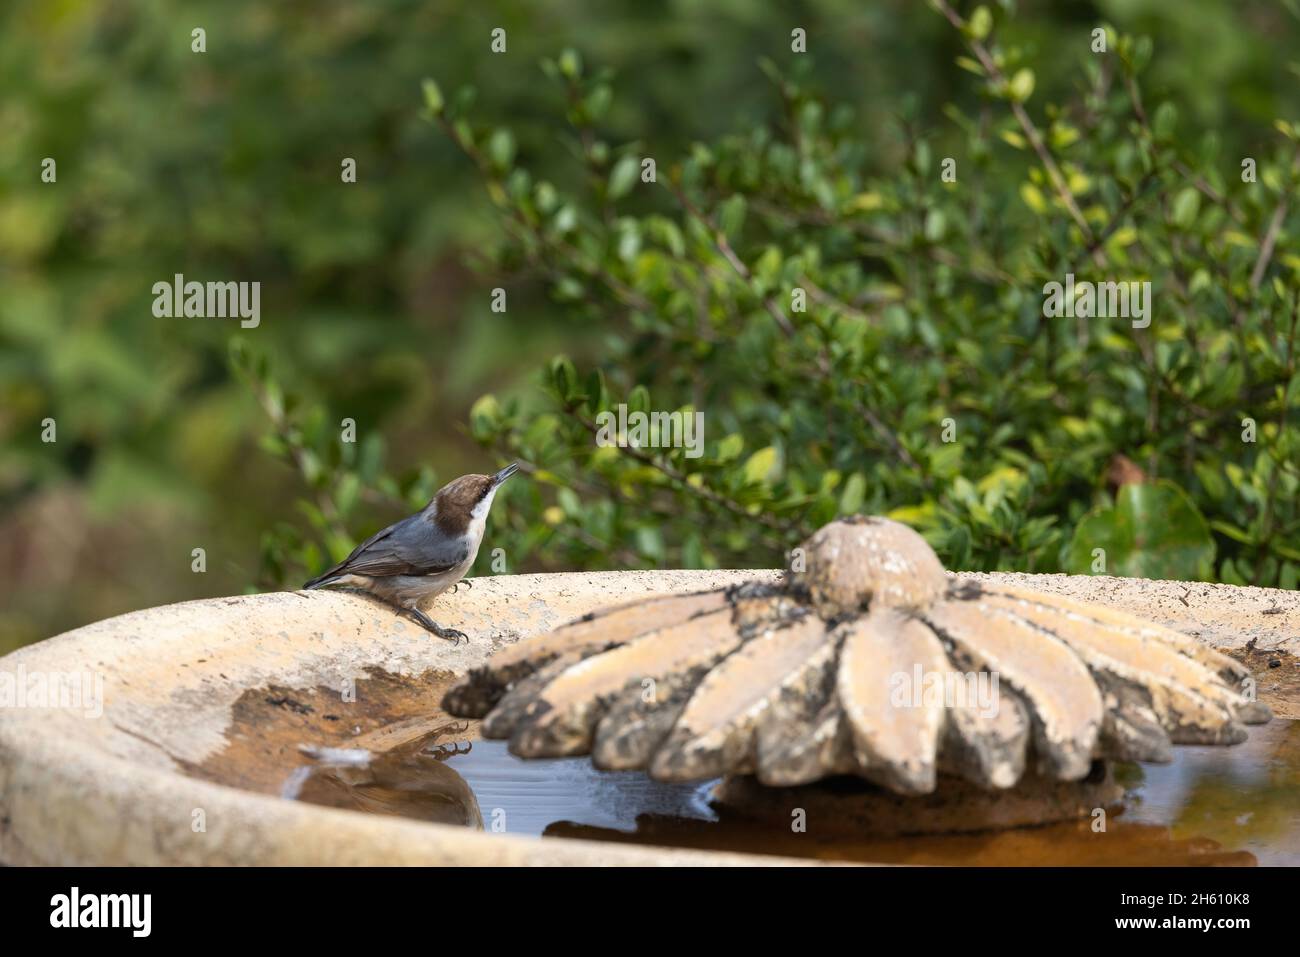 A brown-headed nuthatch (Sitta pusilla) drinking water from a bird bath in St. Augustine, Florida. Stock Photo